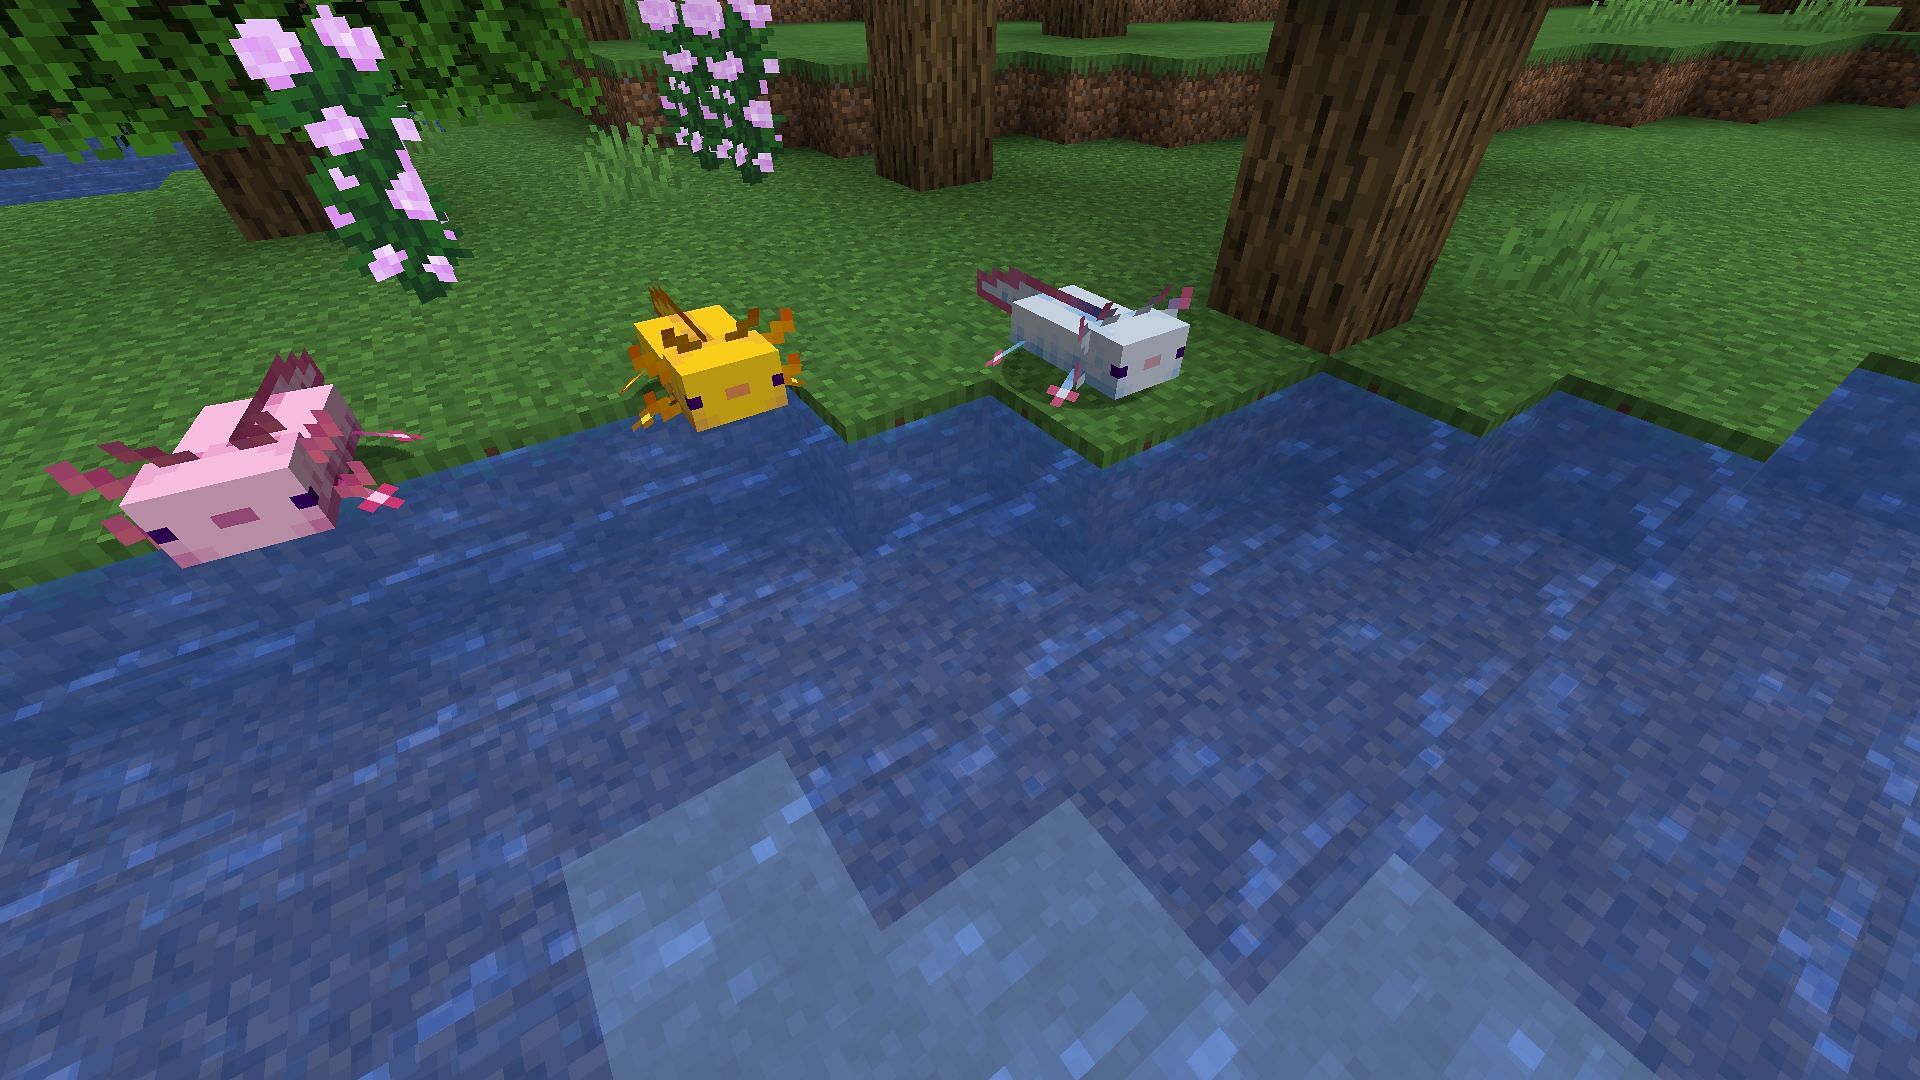 Some of the different colors of the axolotl (Image via Minecraft)